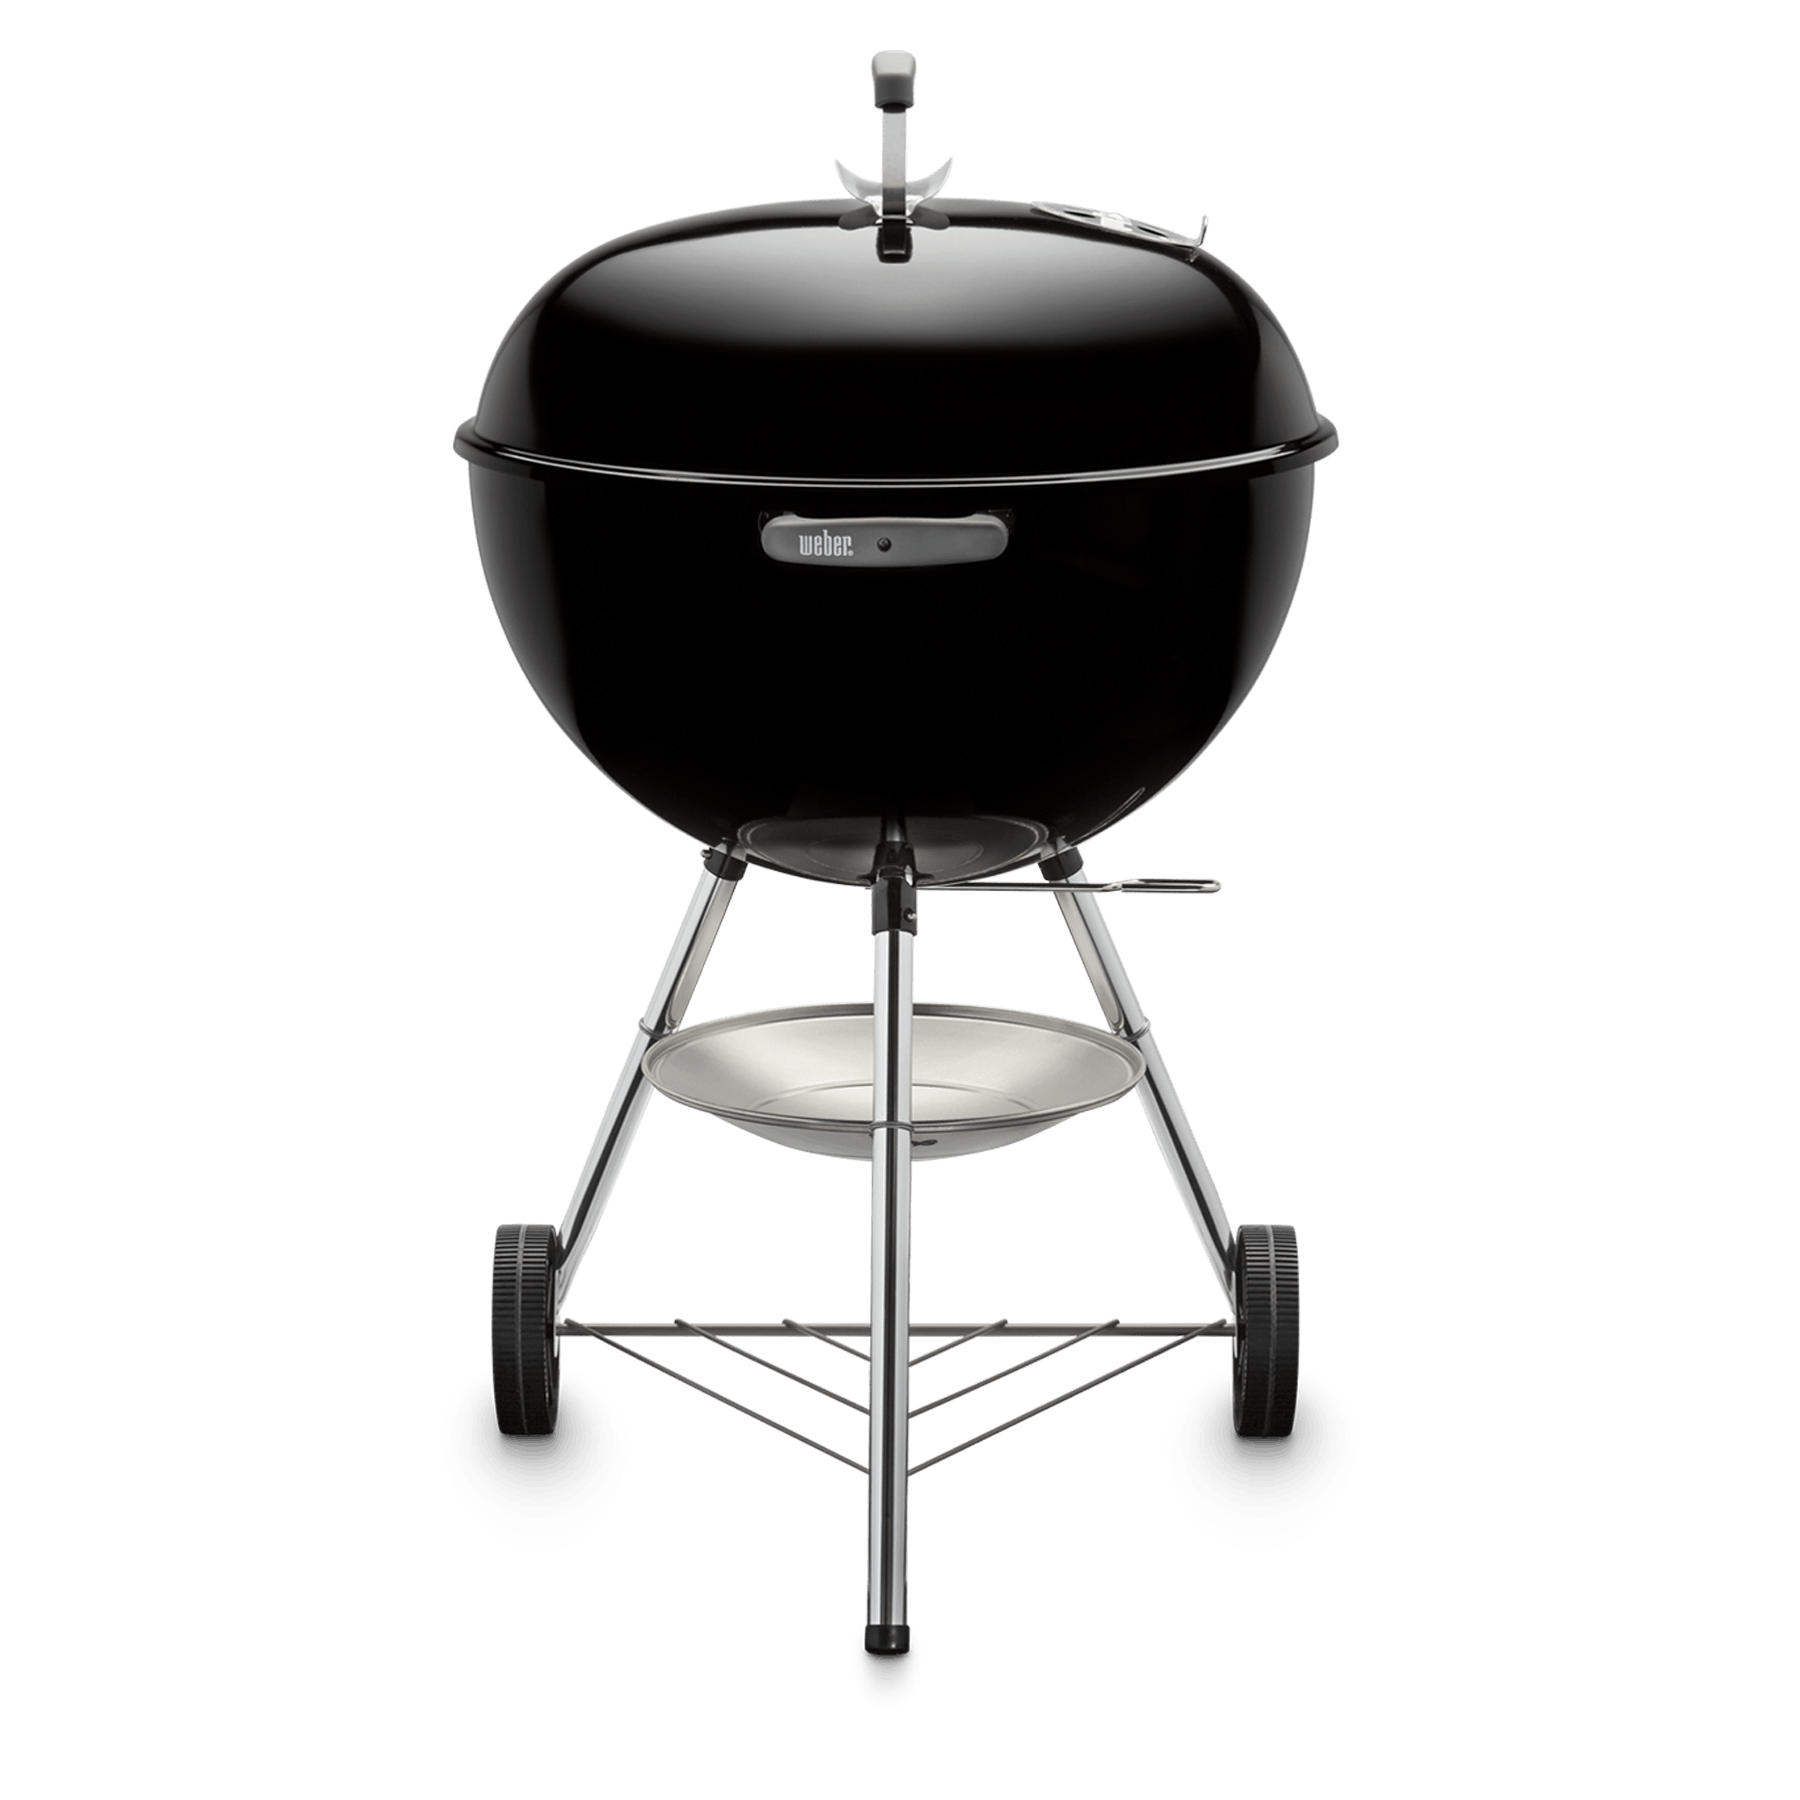 Kettle BBQ Charcoal Grill Portable Barbecue Quality Weber Style /& Stainless Vent